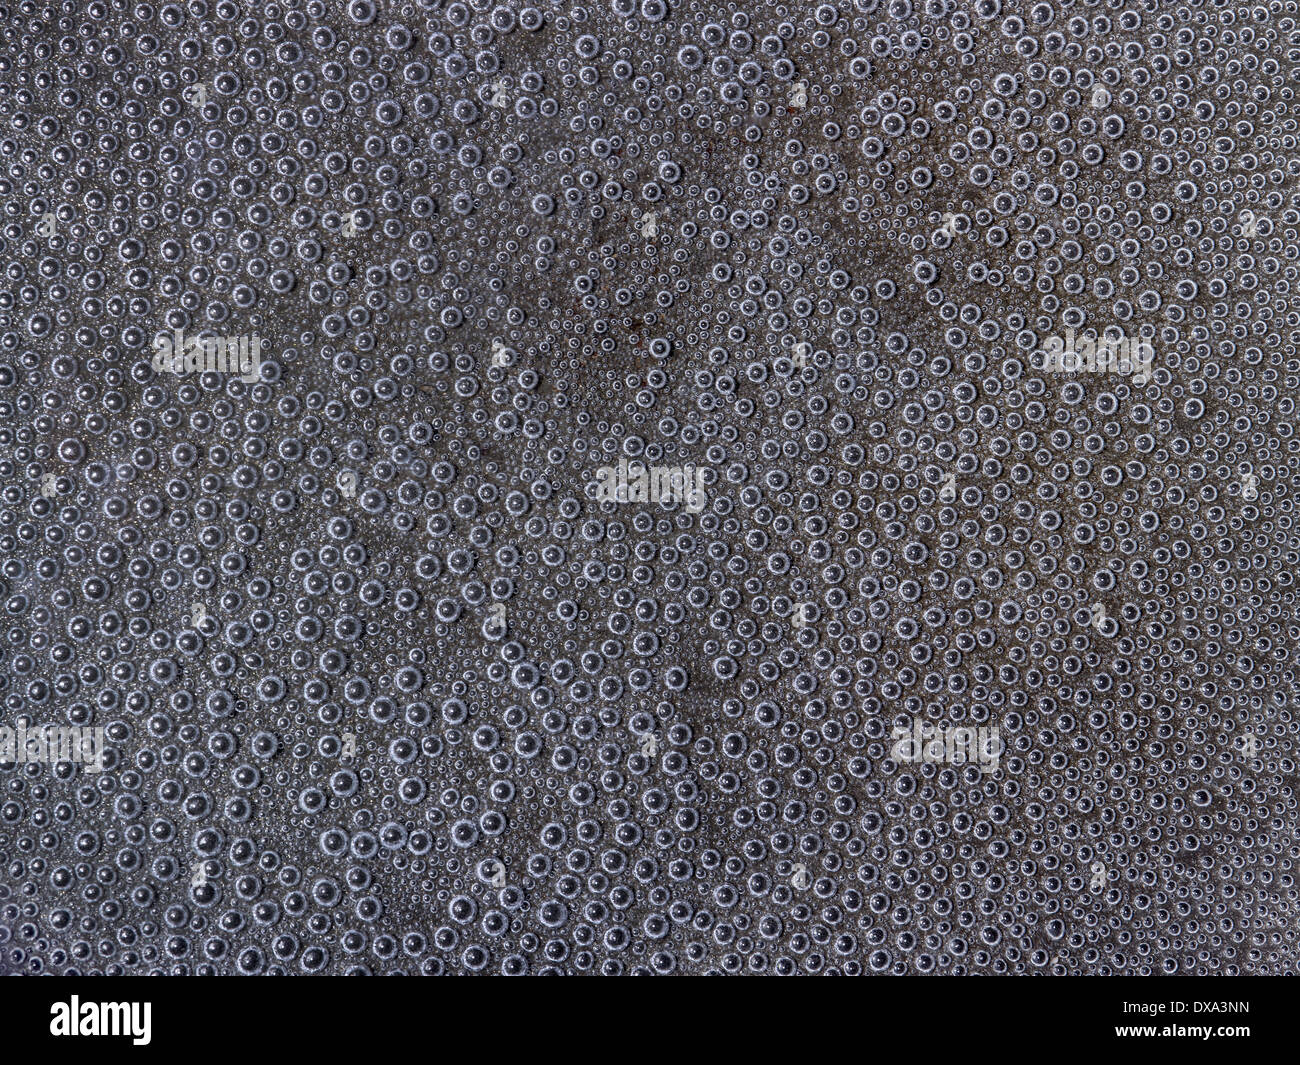 full frame abstract underwater background with lots of small air bubbles on grey ground Stock Photo